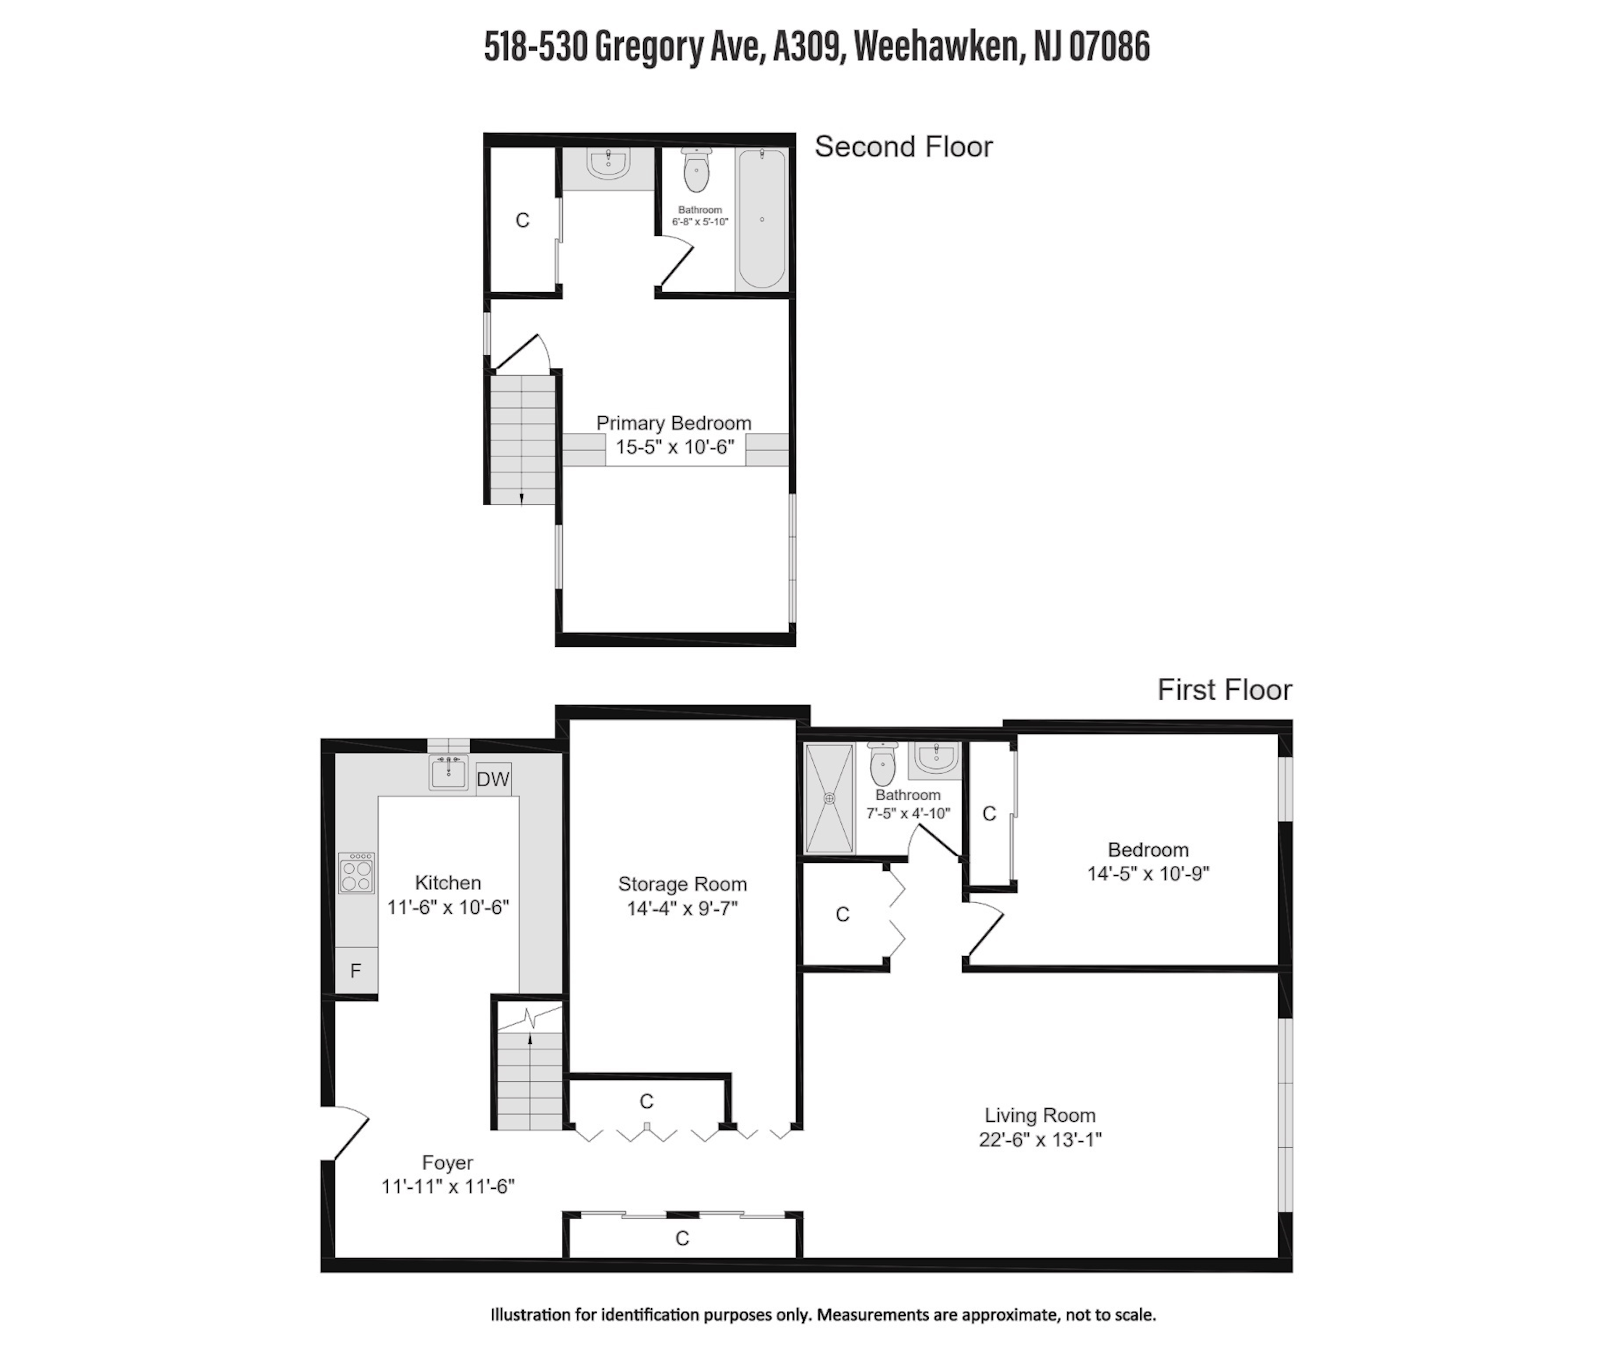 Floorplan for 518-530 Gregory Ave, A309